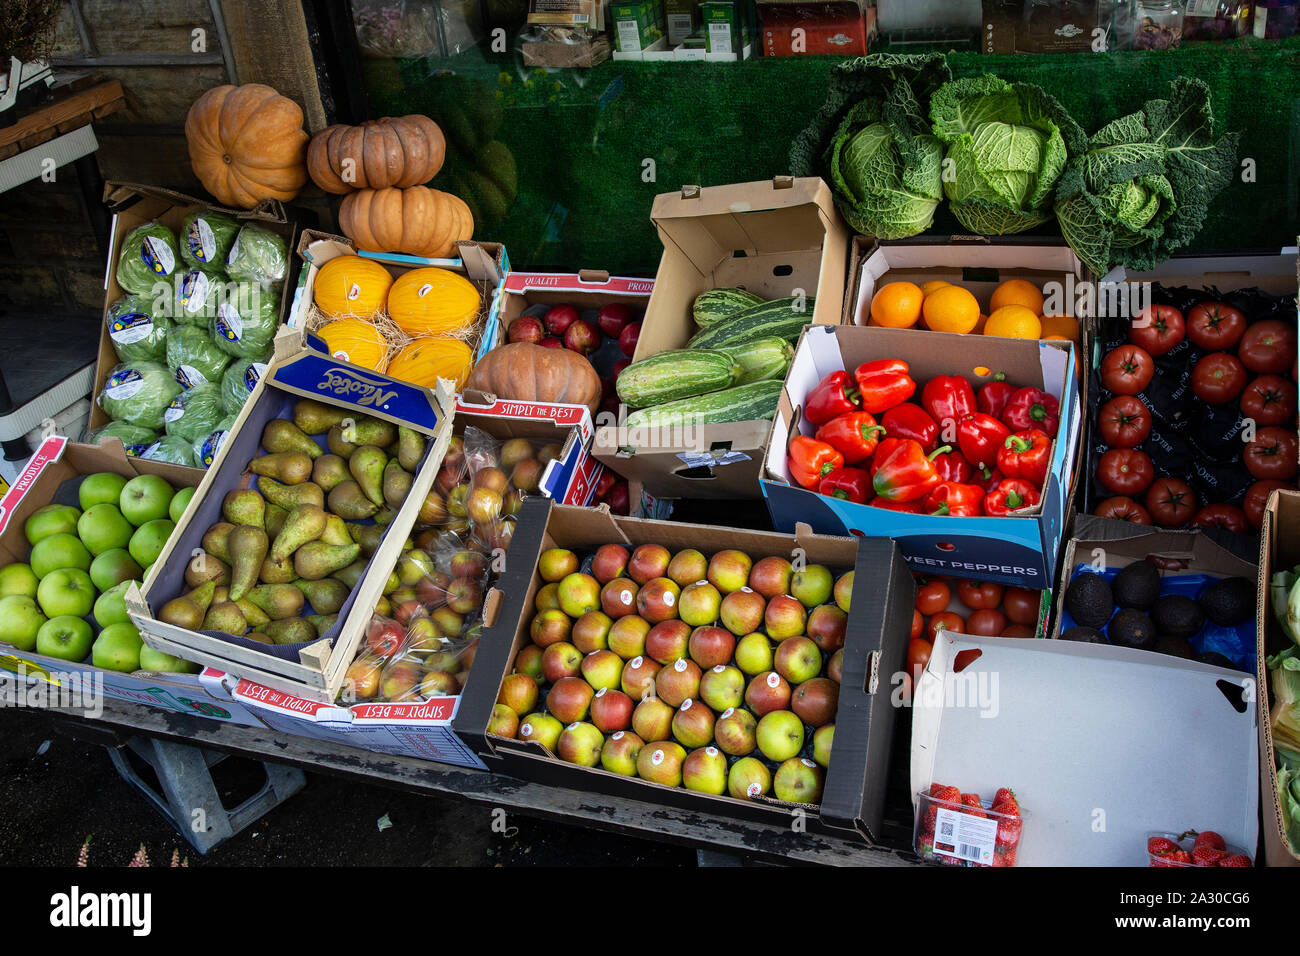 Fruit and vegetables on display outside a greengrocer's shop in Holmfirth, West Yorkshire Stock Photo